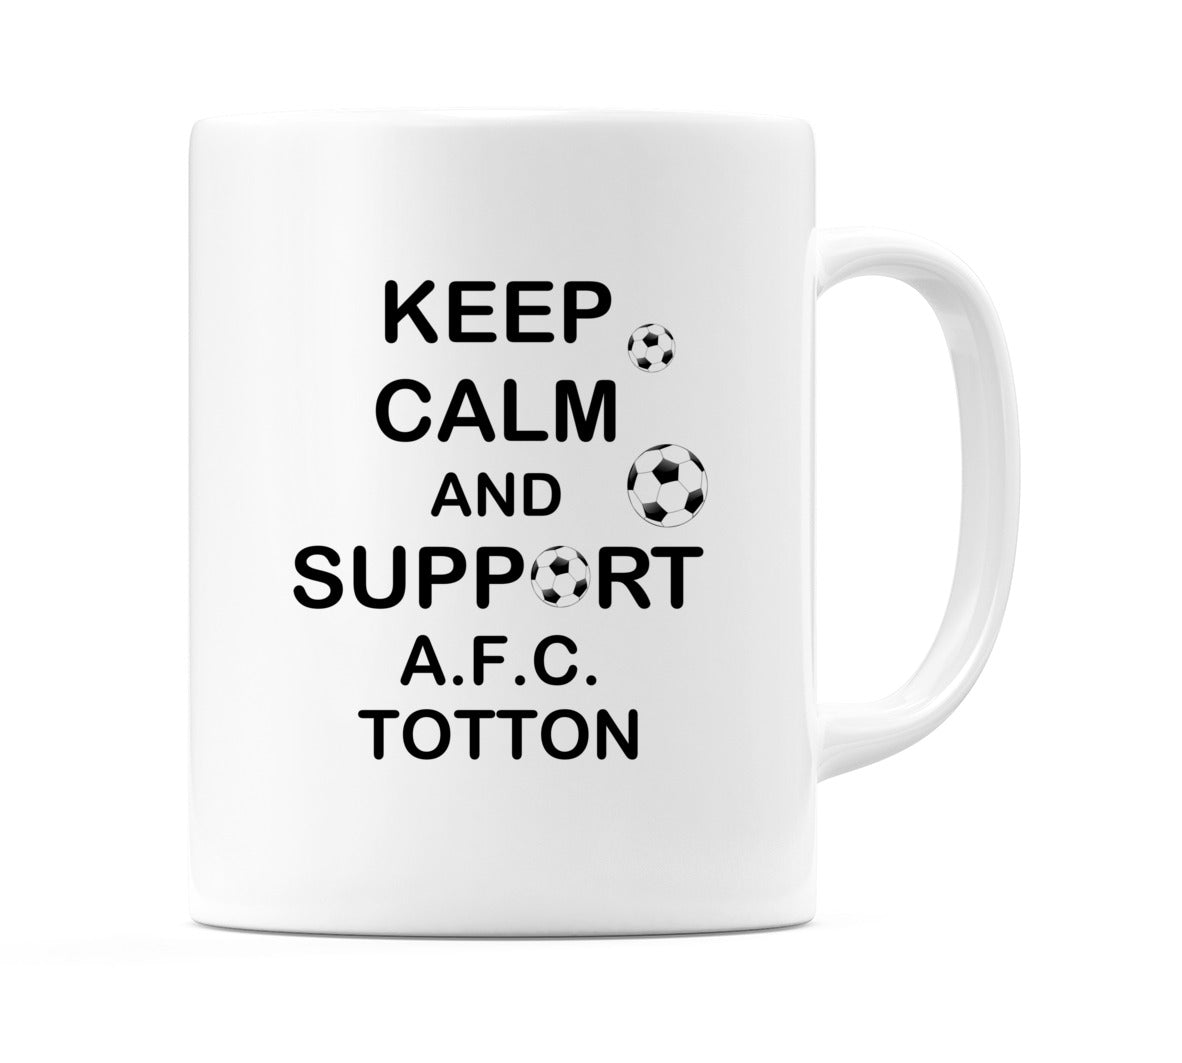 Keep Calm And Support A.F.C. Totton Mug